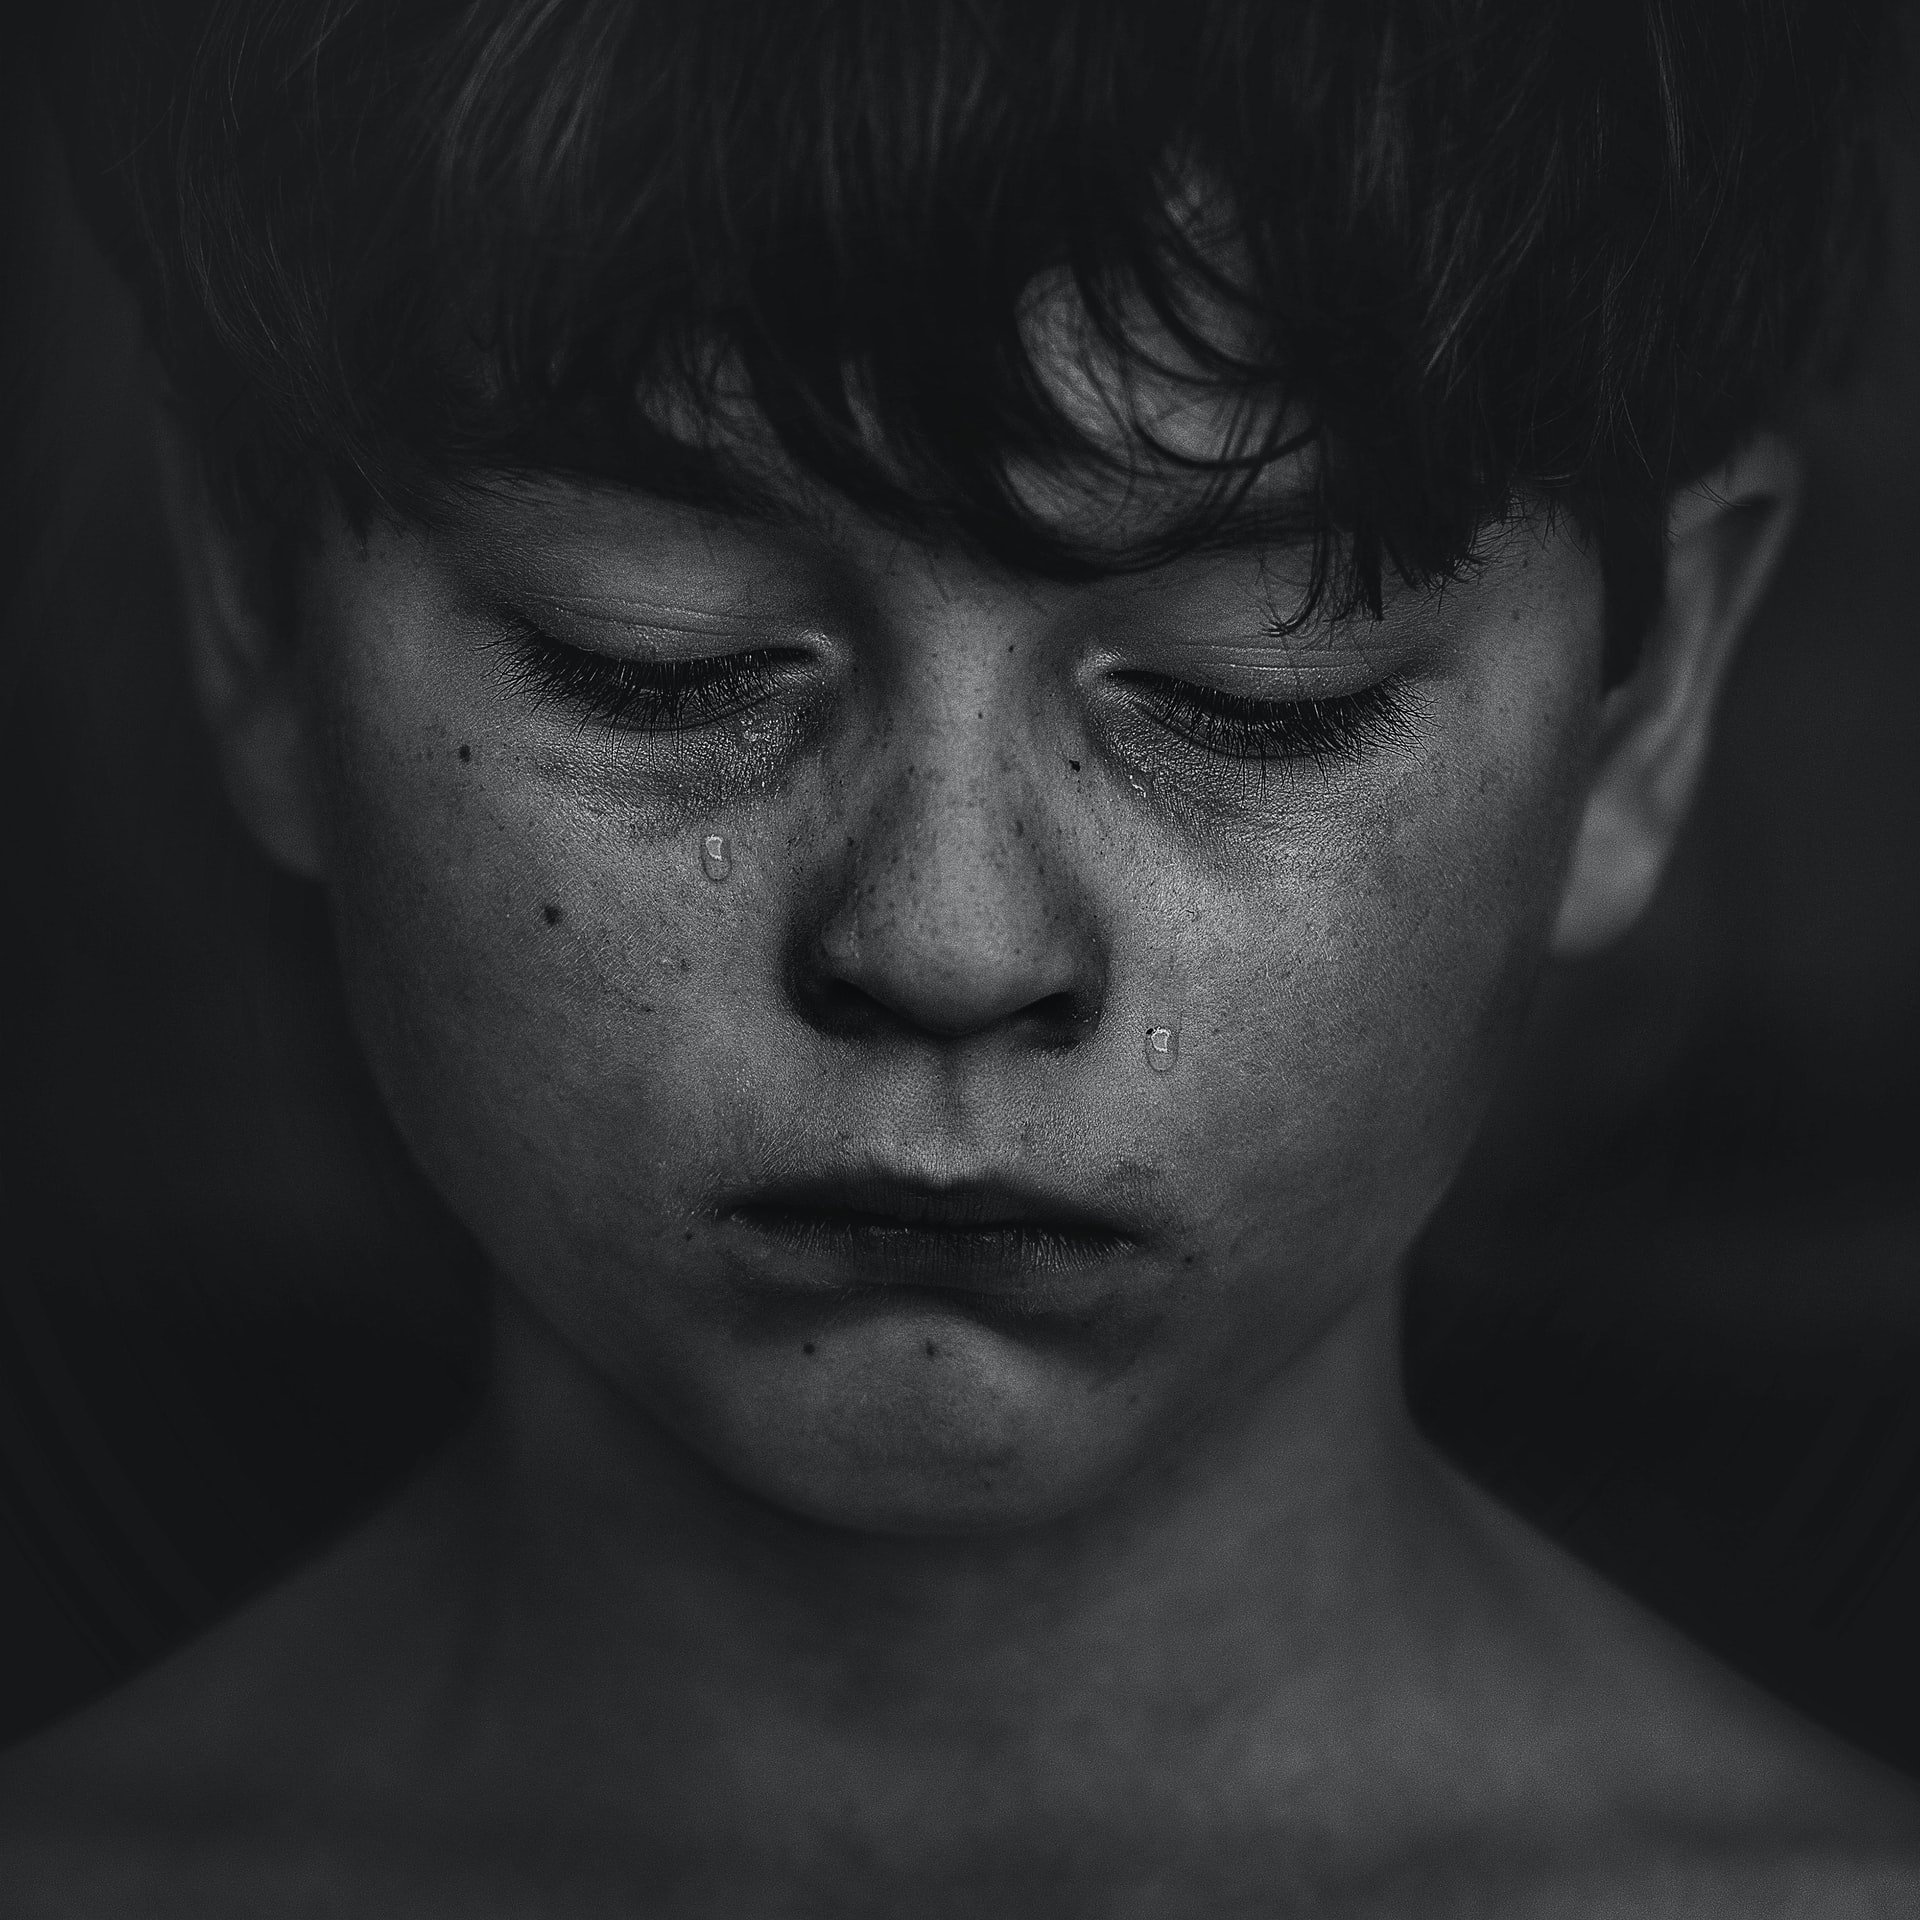 OP felt neglected when his parents adopted the children | Source: Unsplash